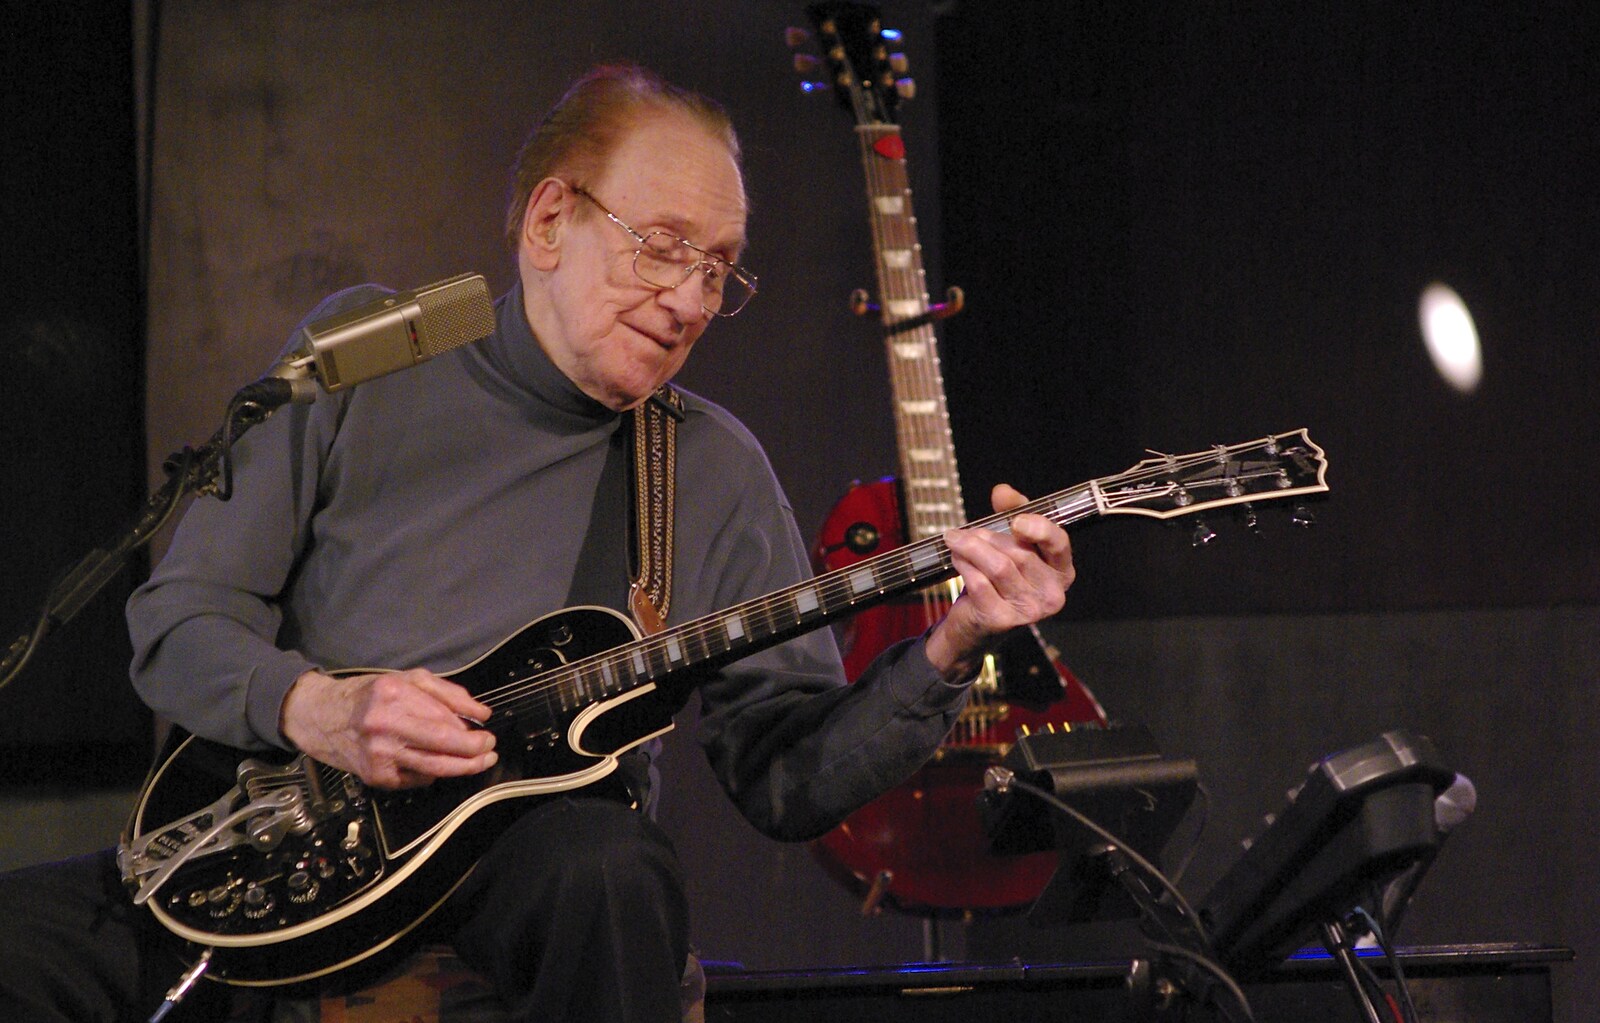 Les Paul in action from A Central Park Marathon, Les Paul at the Iridium Club and an Empire State Sunset, New York, US - 25th March 2007